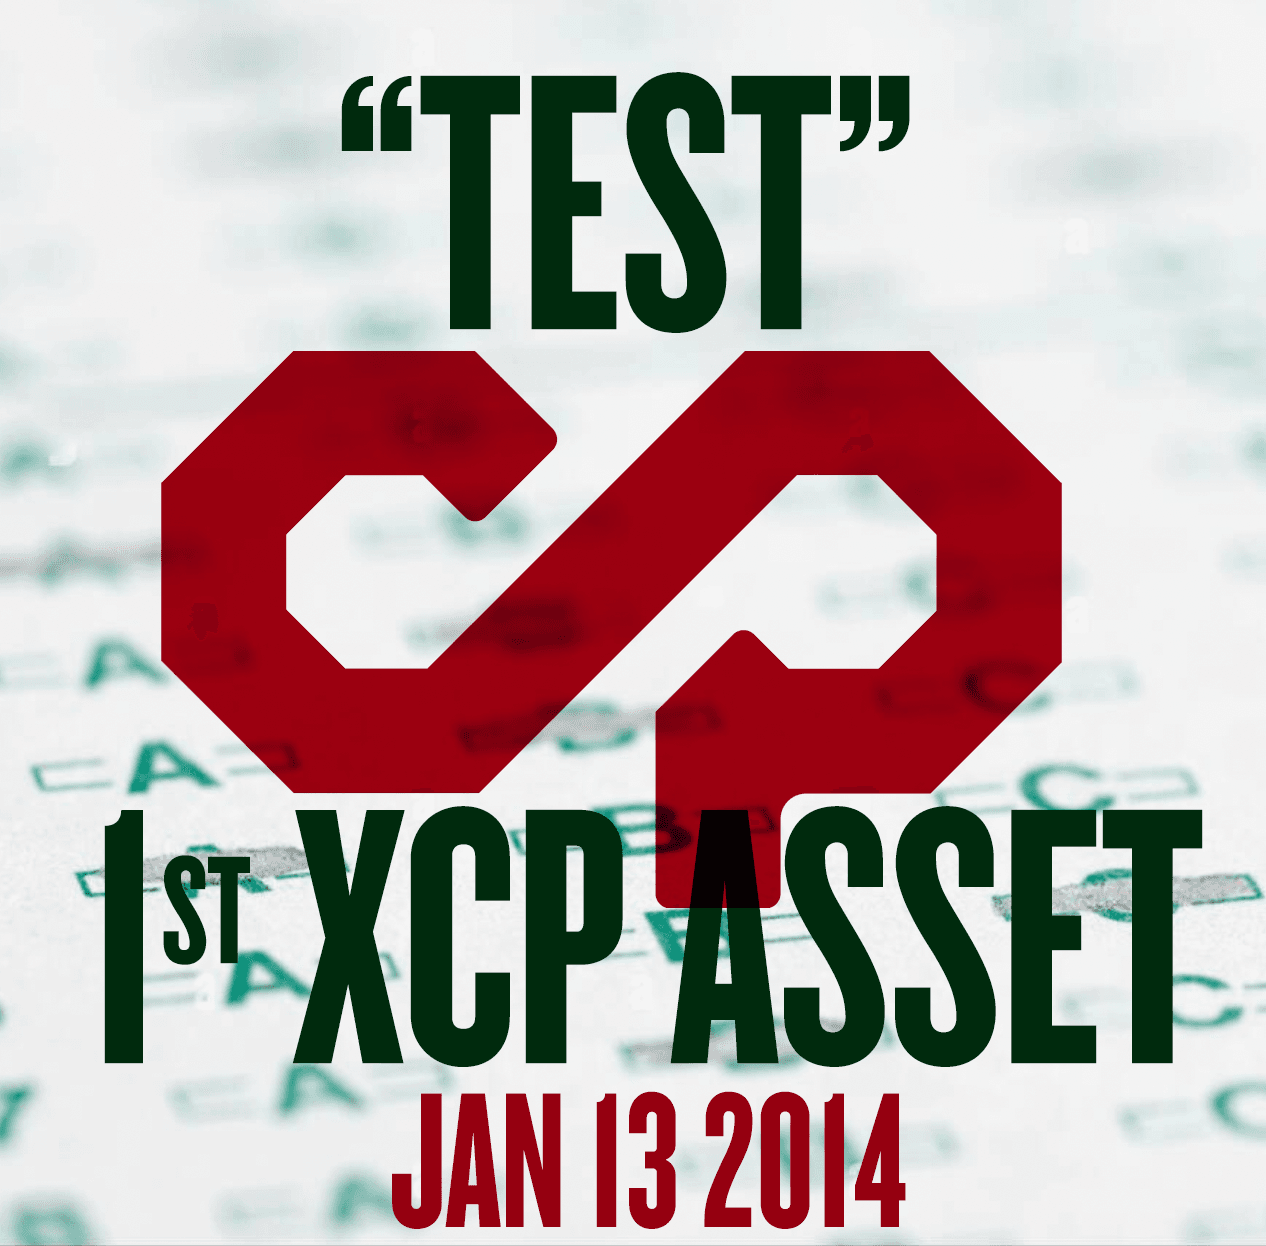 TEST | 1st Counterparty Asset | Jan 13 2014